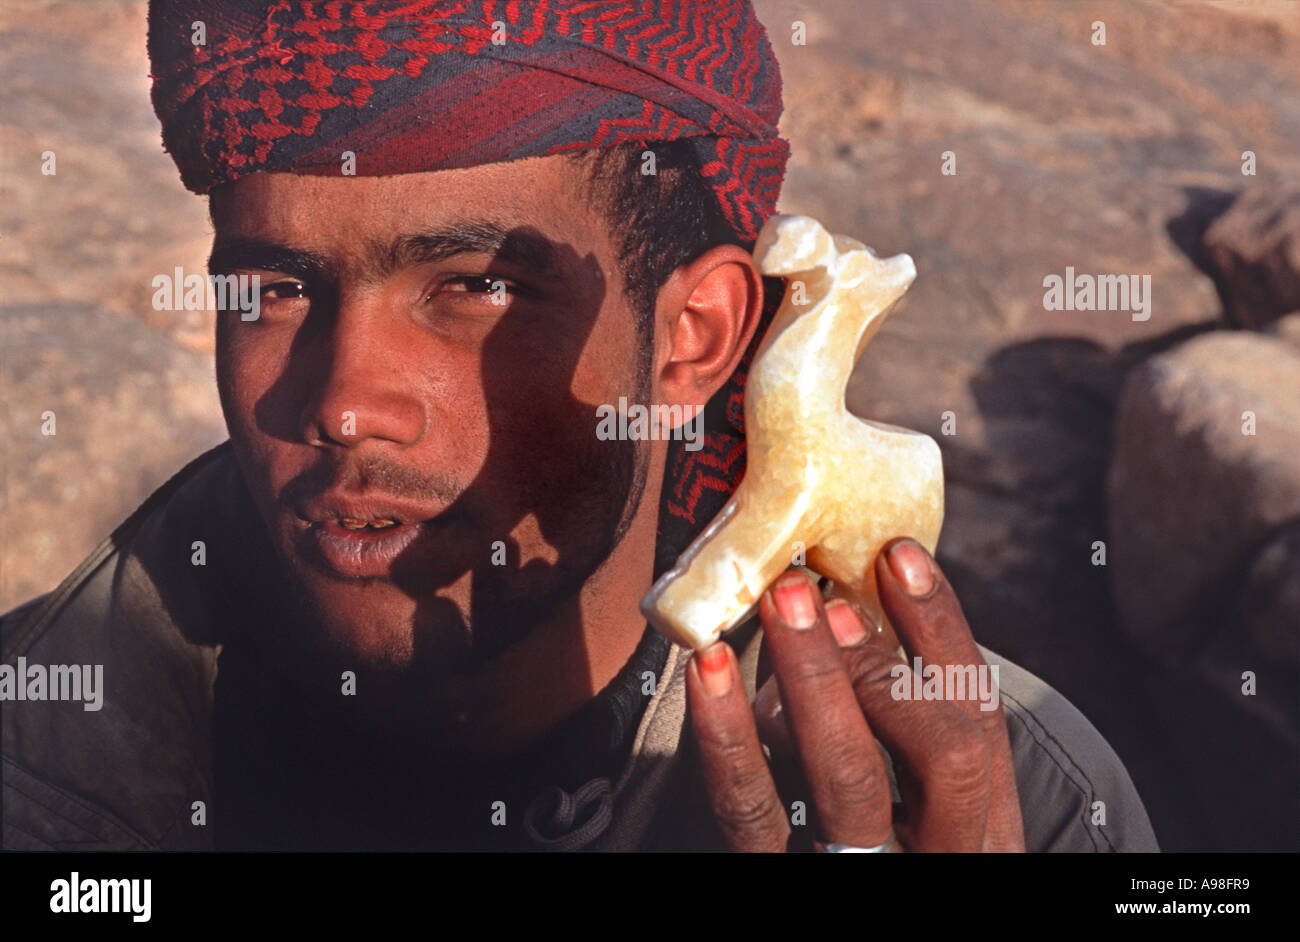 Bedouin vendor selling from his stall on the summit of Mount Sinai Popular hike for pilgrims and tourists alike Holy land, Egypt Stock Photo